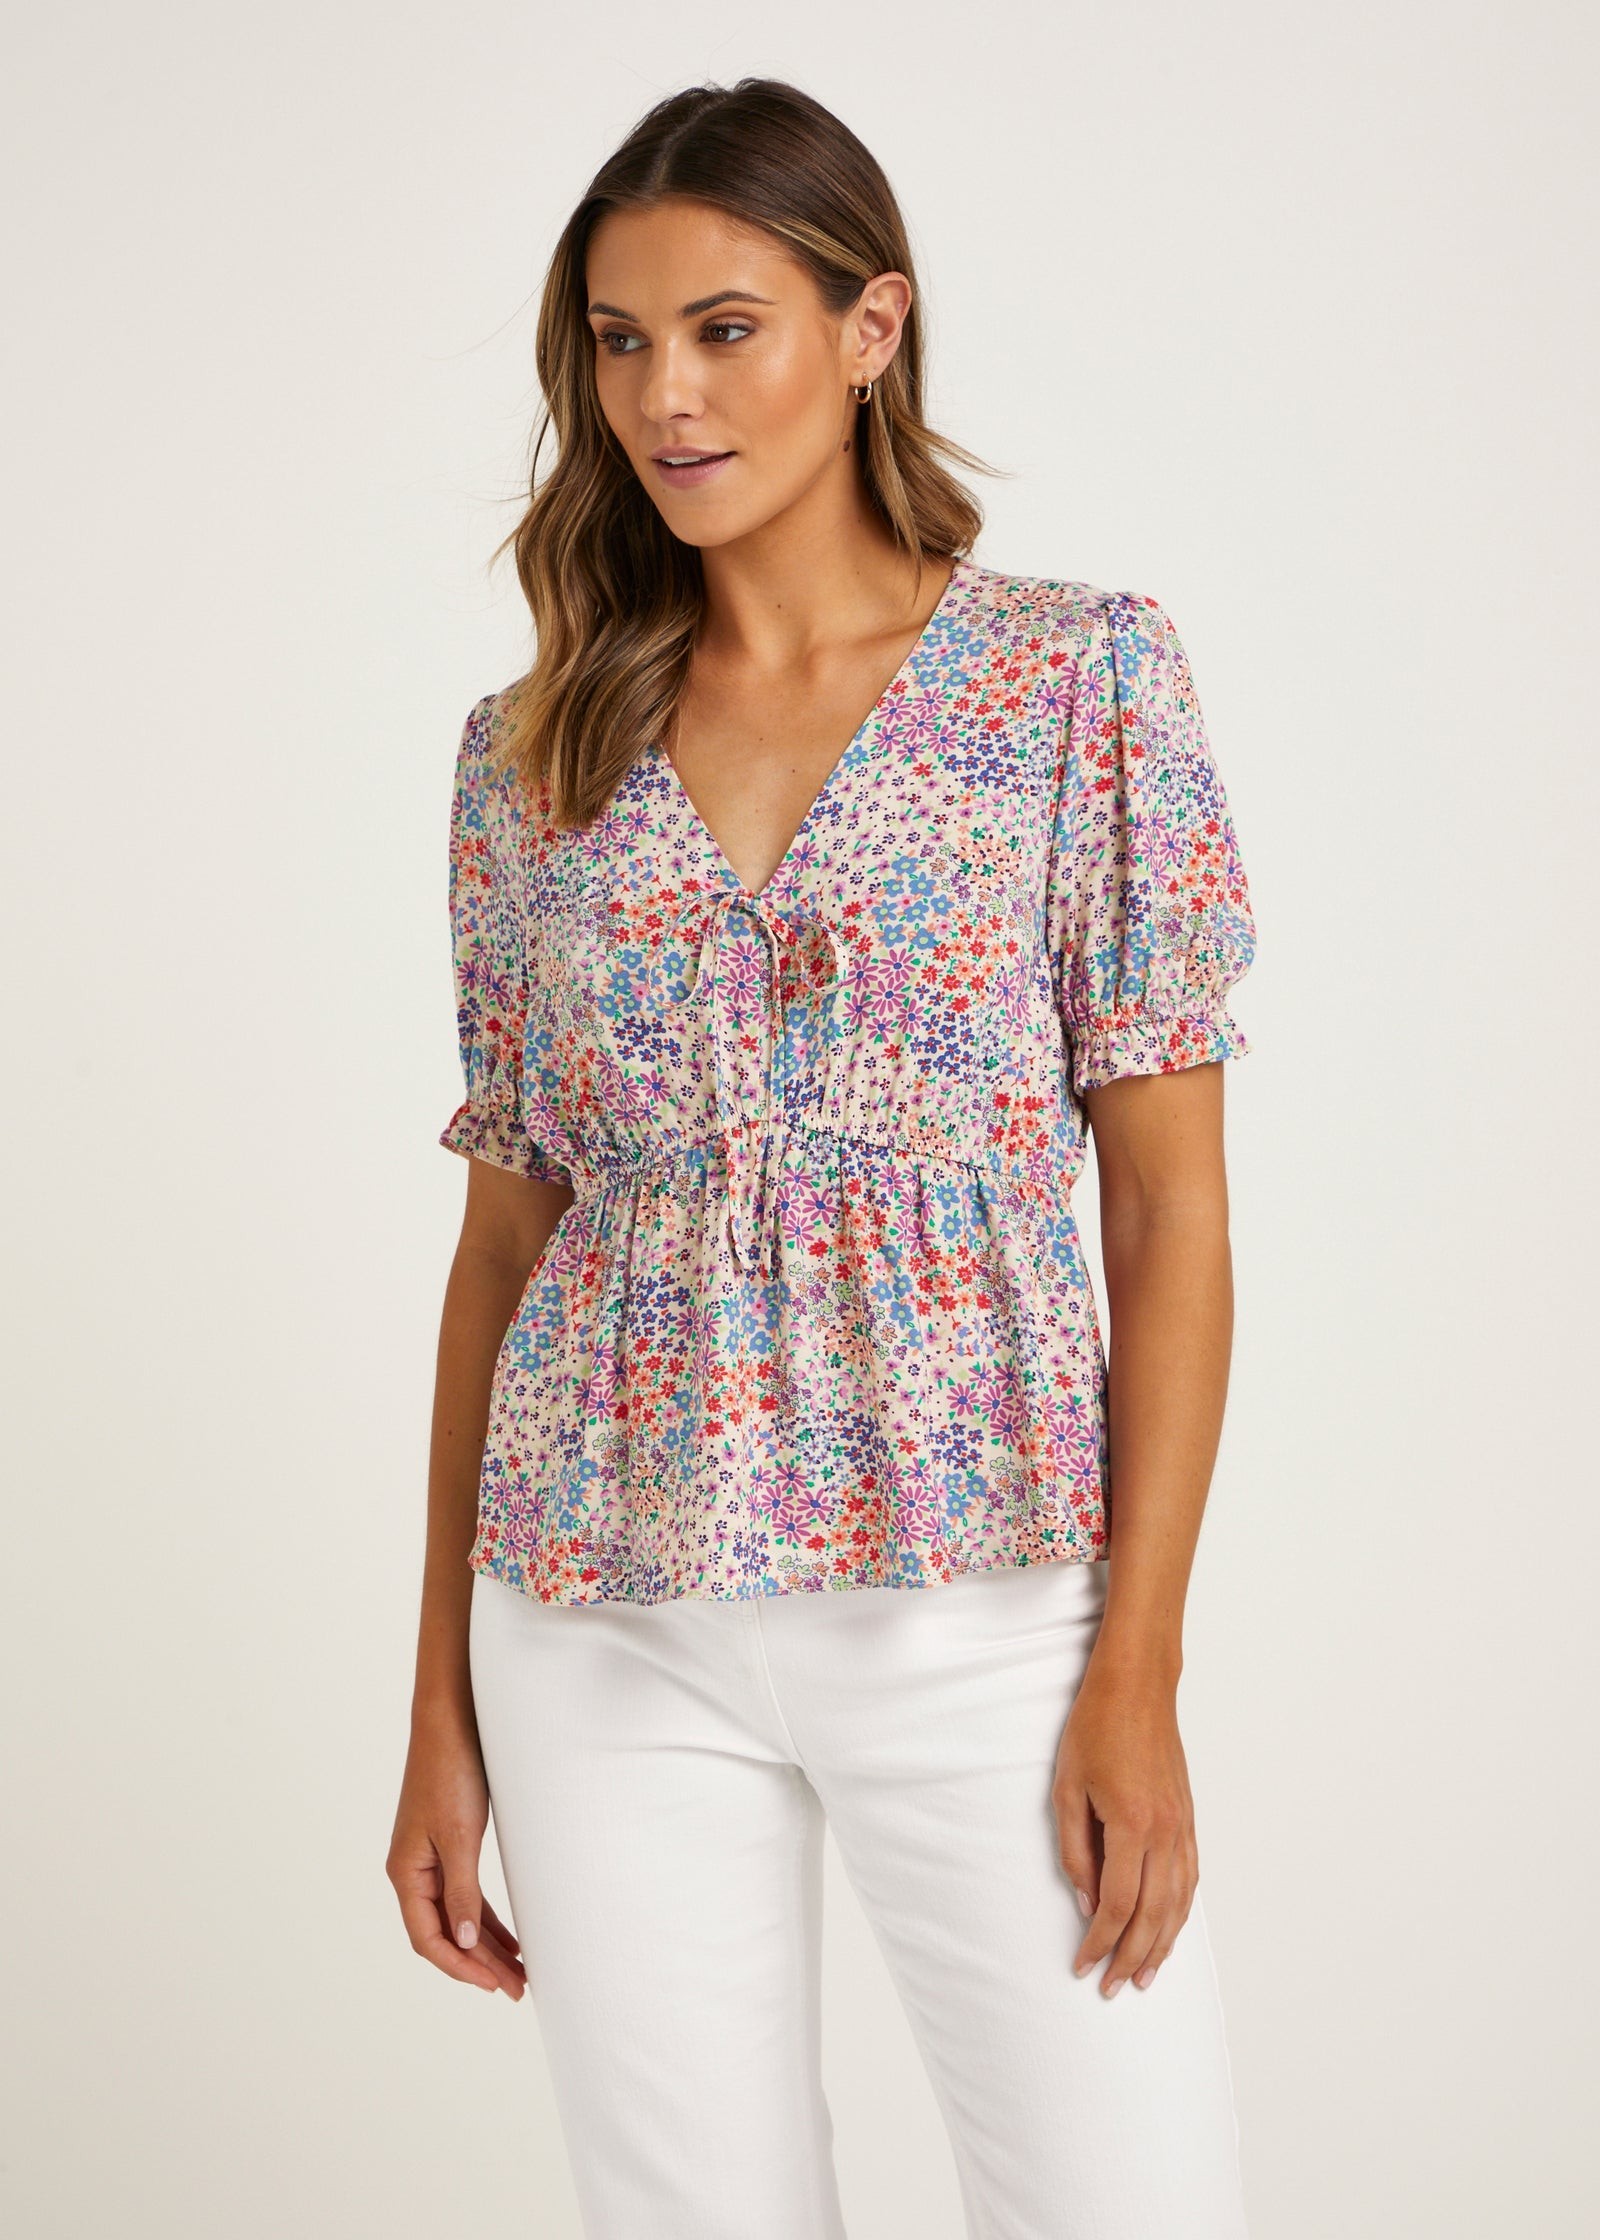 Youth Peplum Top | Blue Ditsy Floral